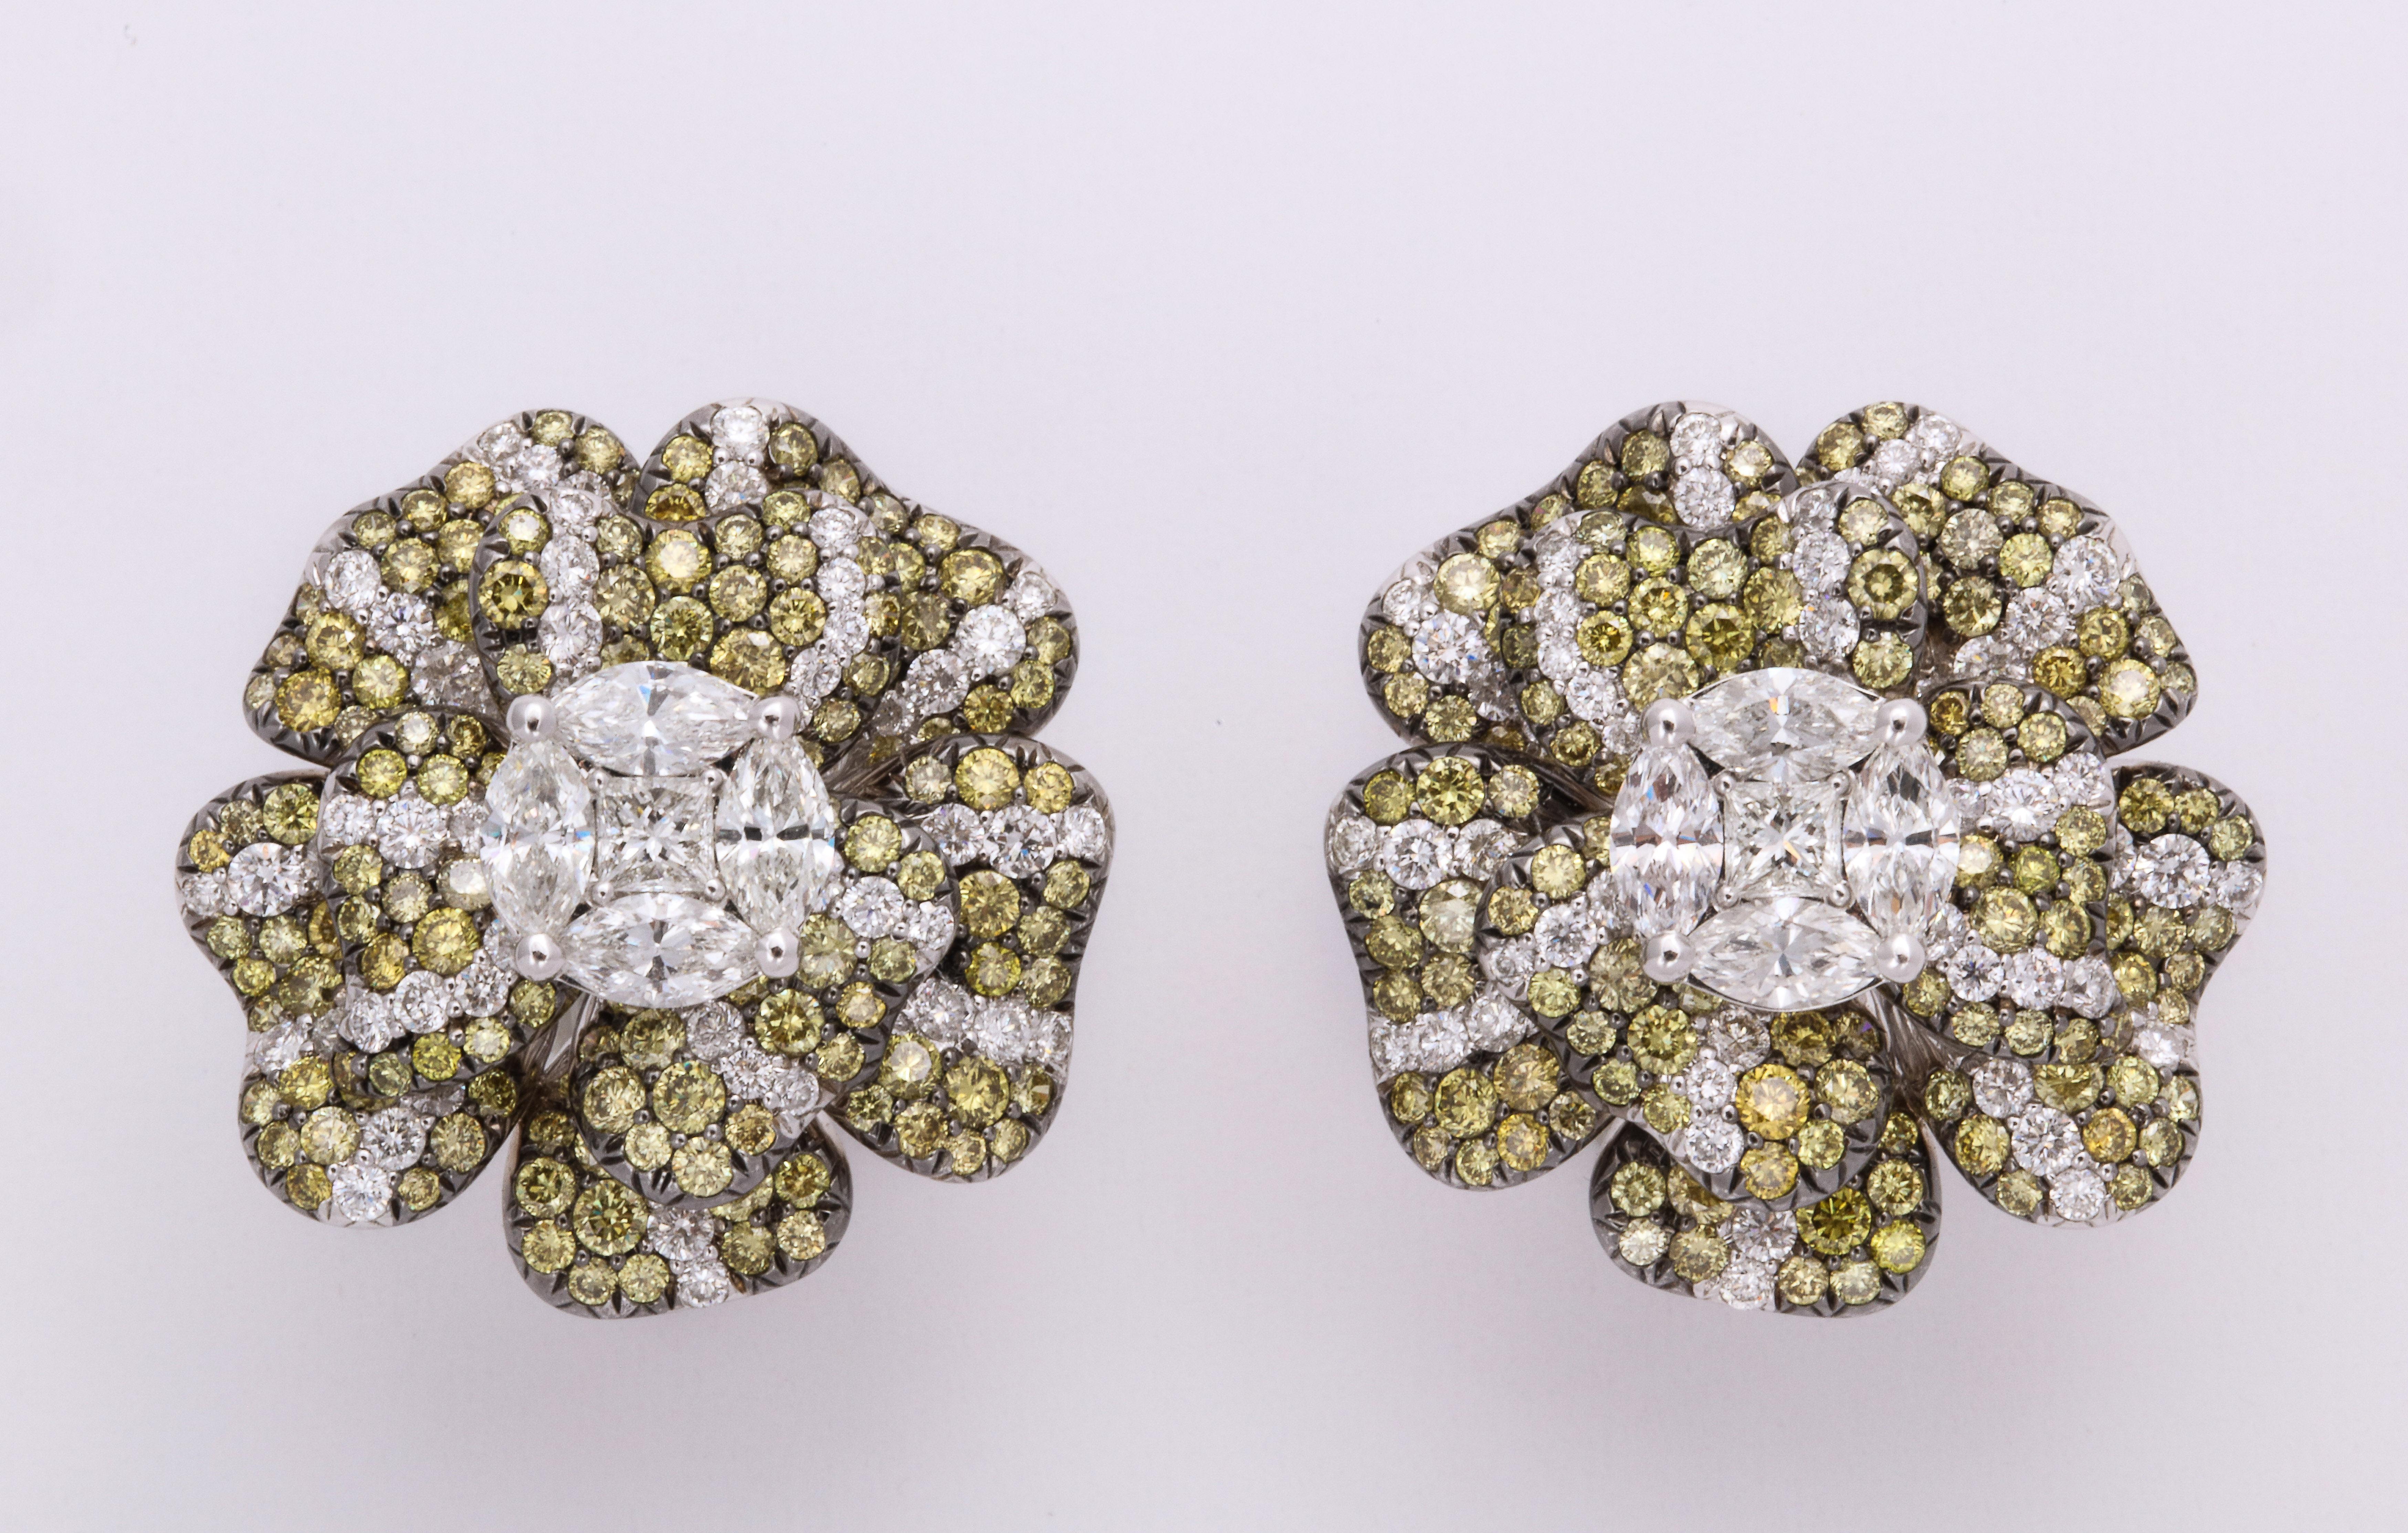 Bright and happy 18K white gold floral earclips composed of individual petals adding animated breath to the complete flower.  Completely pave'-set with natural color round brilliant cut greenish yellow diamonds, and wisps of colorless diamonds,